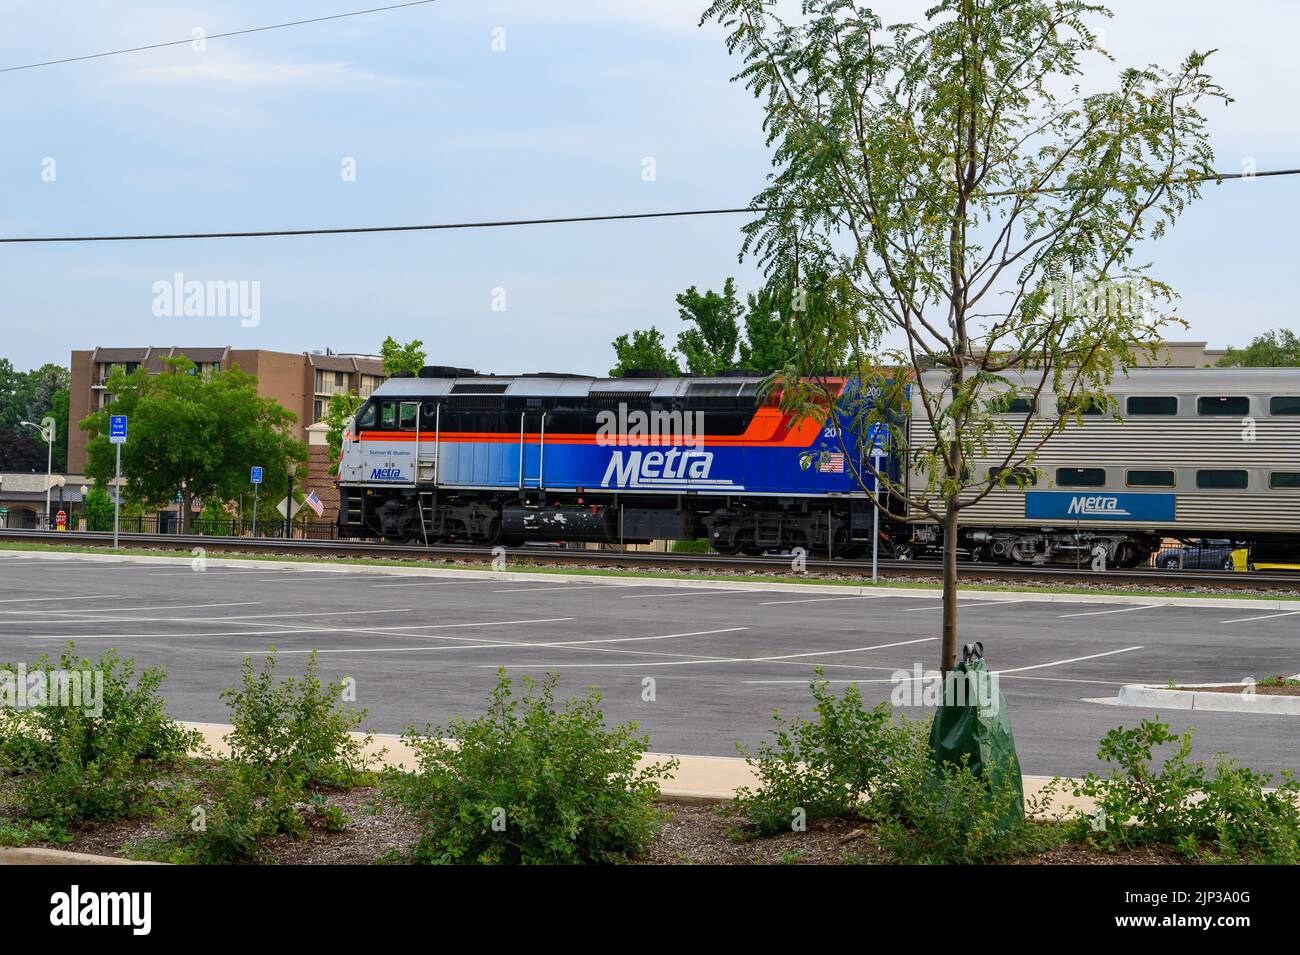 Metra train heading west on the BNSF train line through Downers Grove, IL downtown train station. Stock Photo